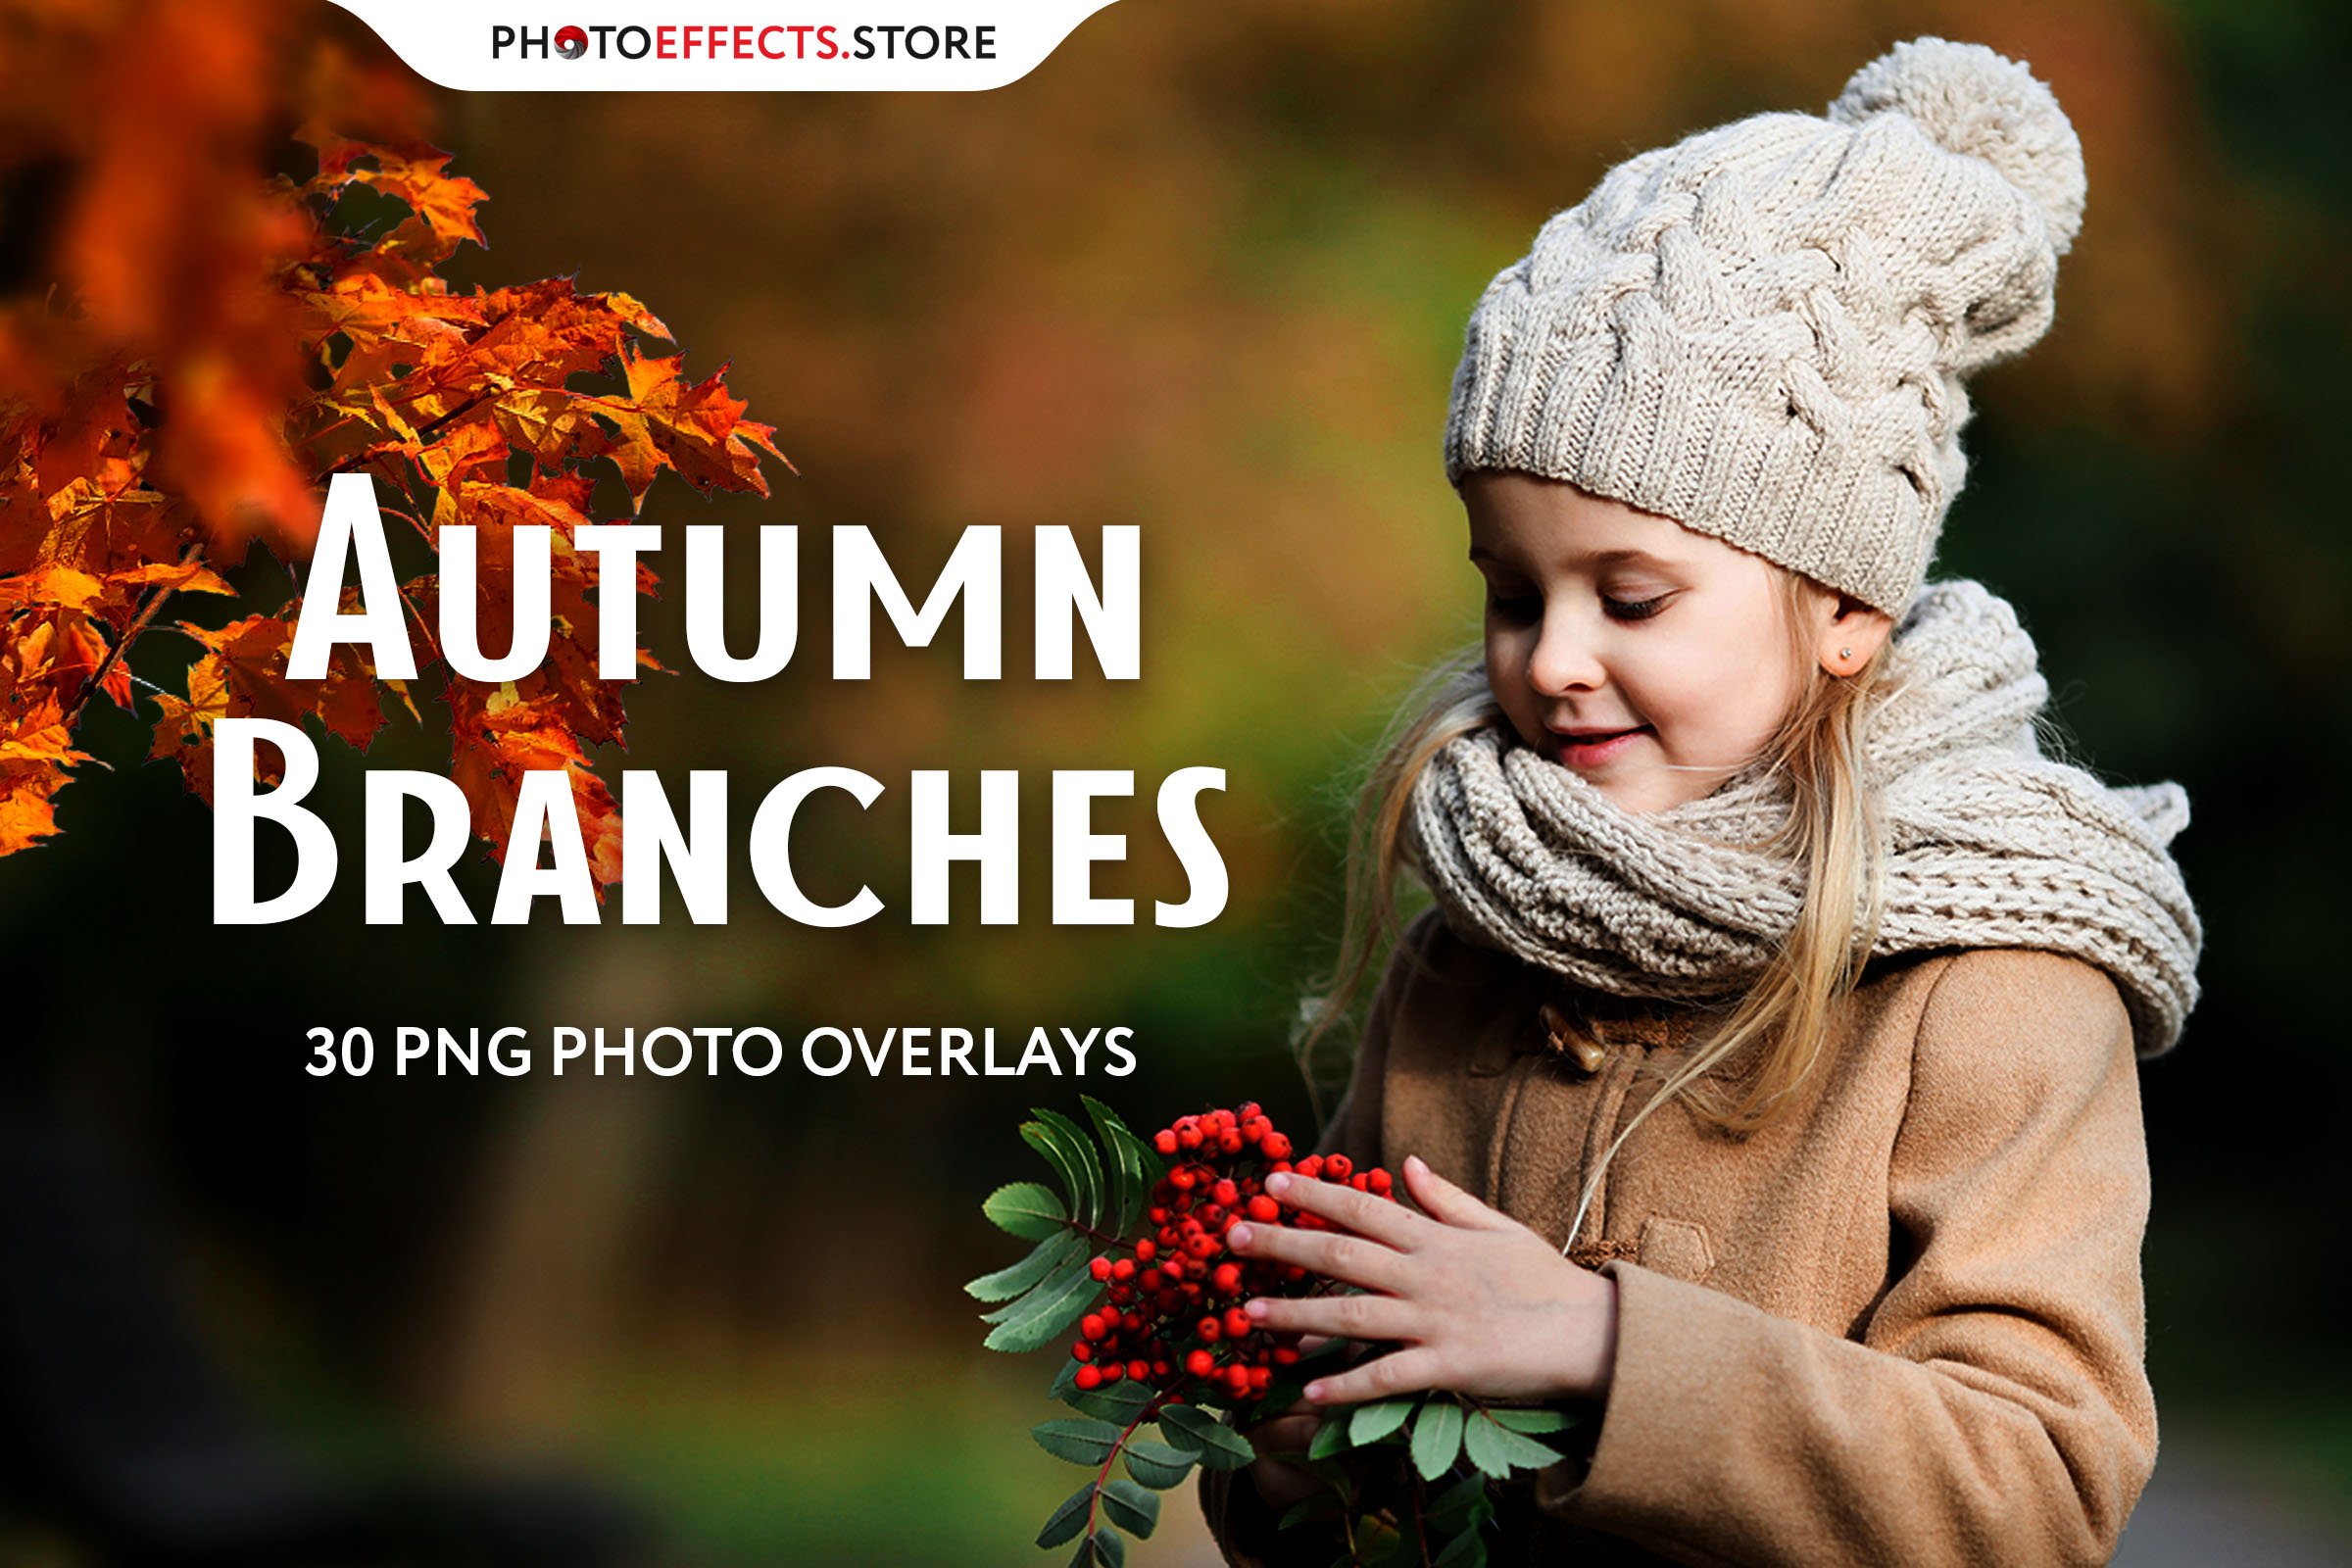 30 Autumn Branch Photo Overlayscover image.